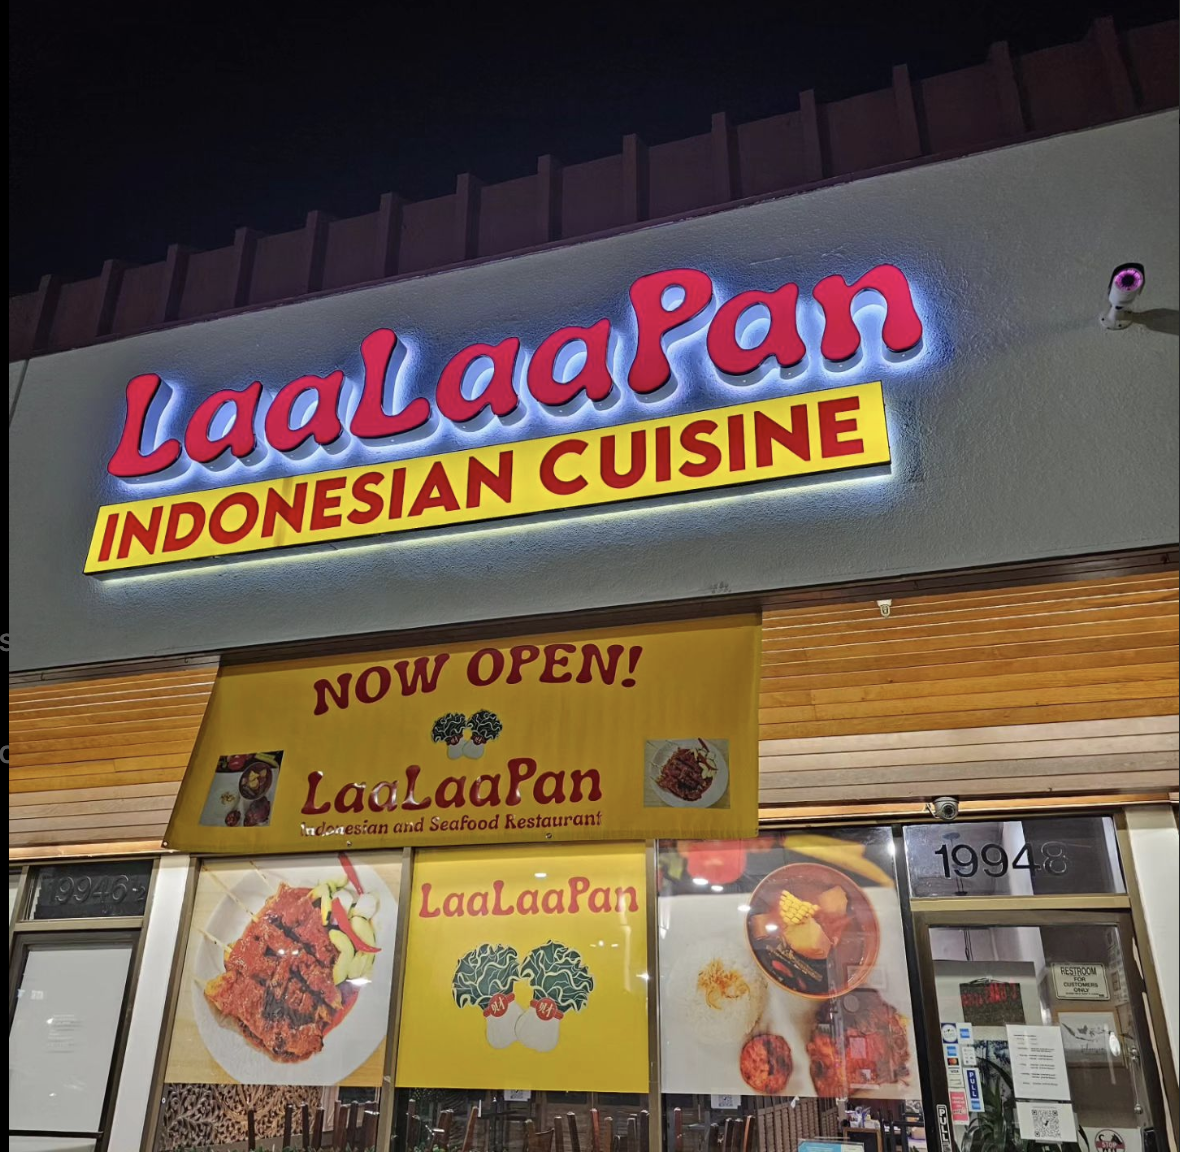 Exterior building and signage for LaaLaaPan in Woodland Hills.